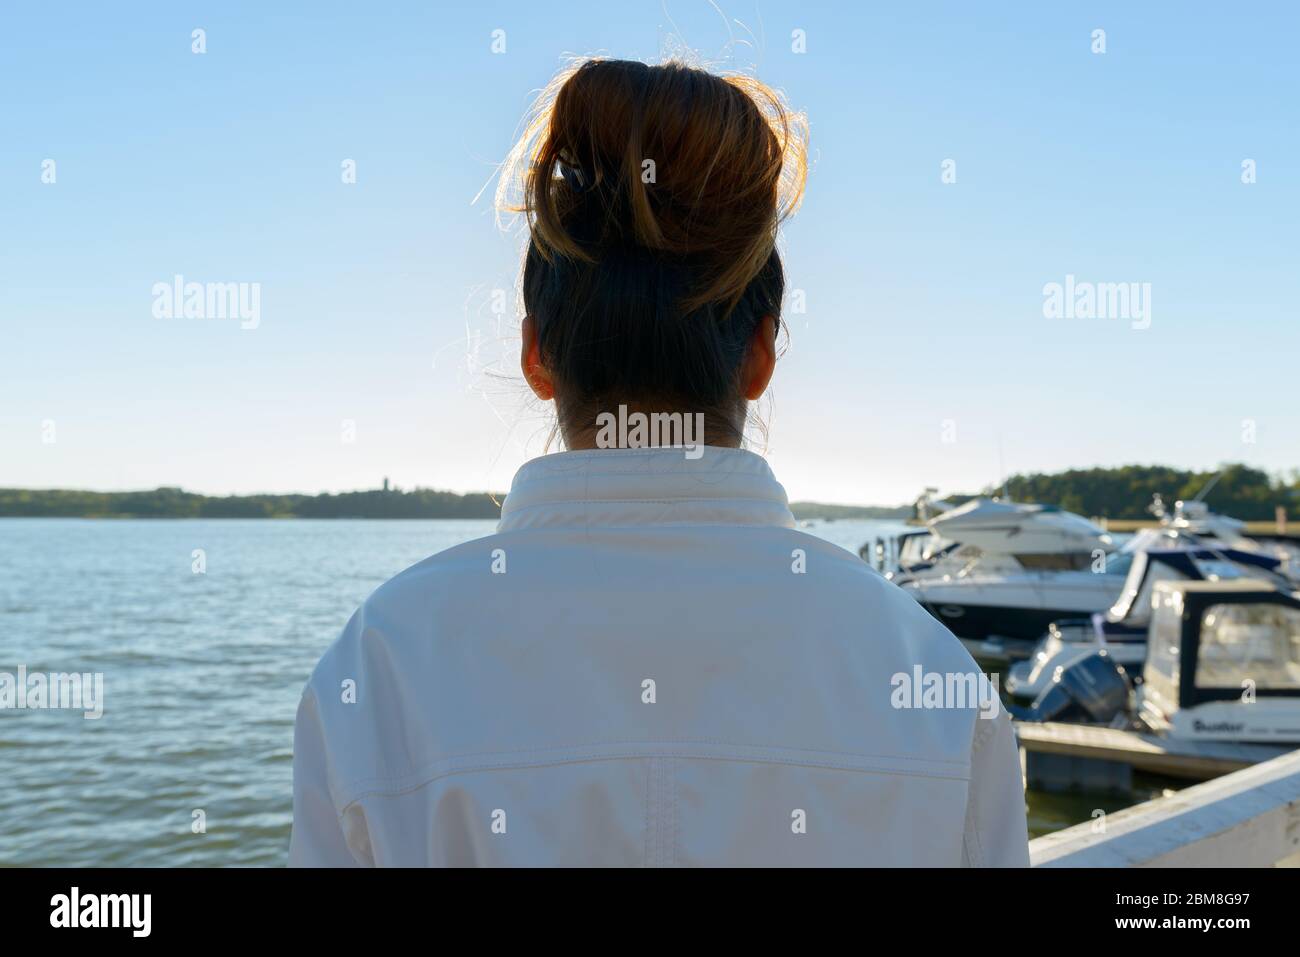 Closeup rear view of young Asian woman against beautiful scenery at the pier Stock Photo